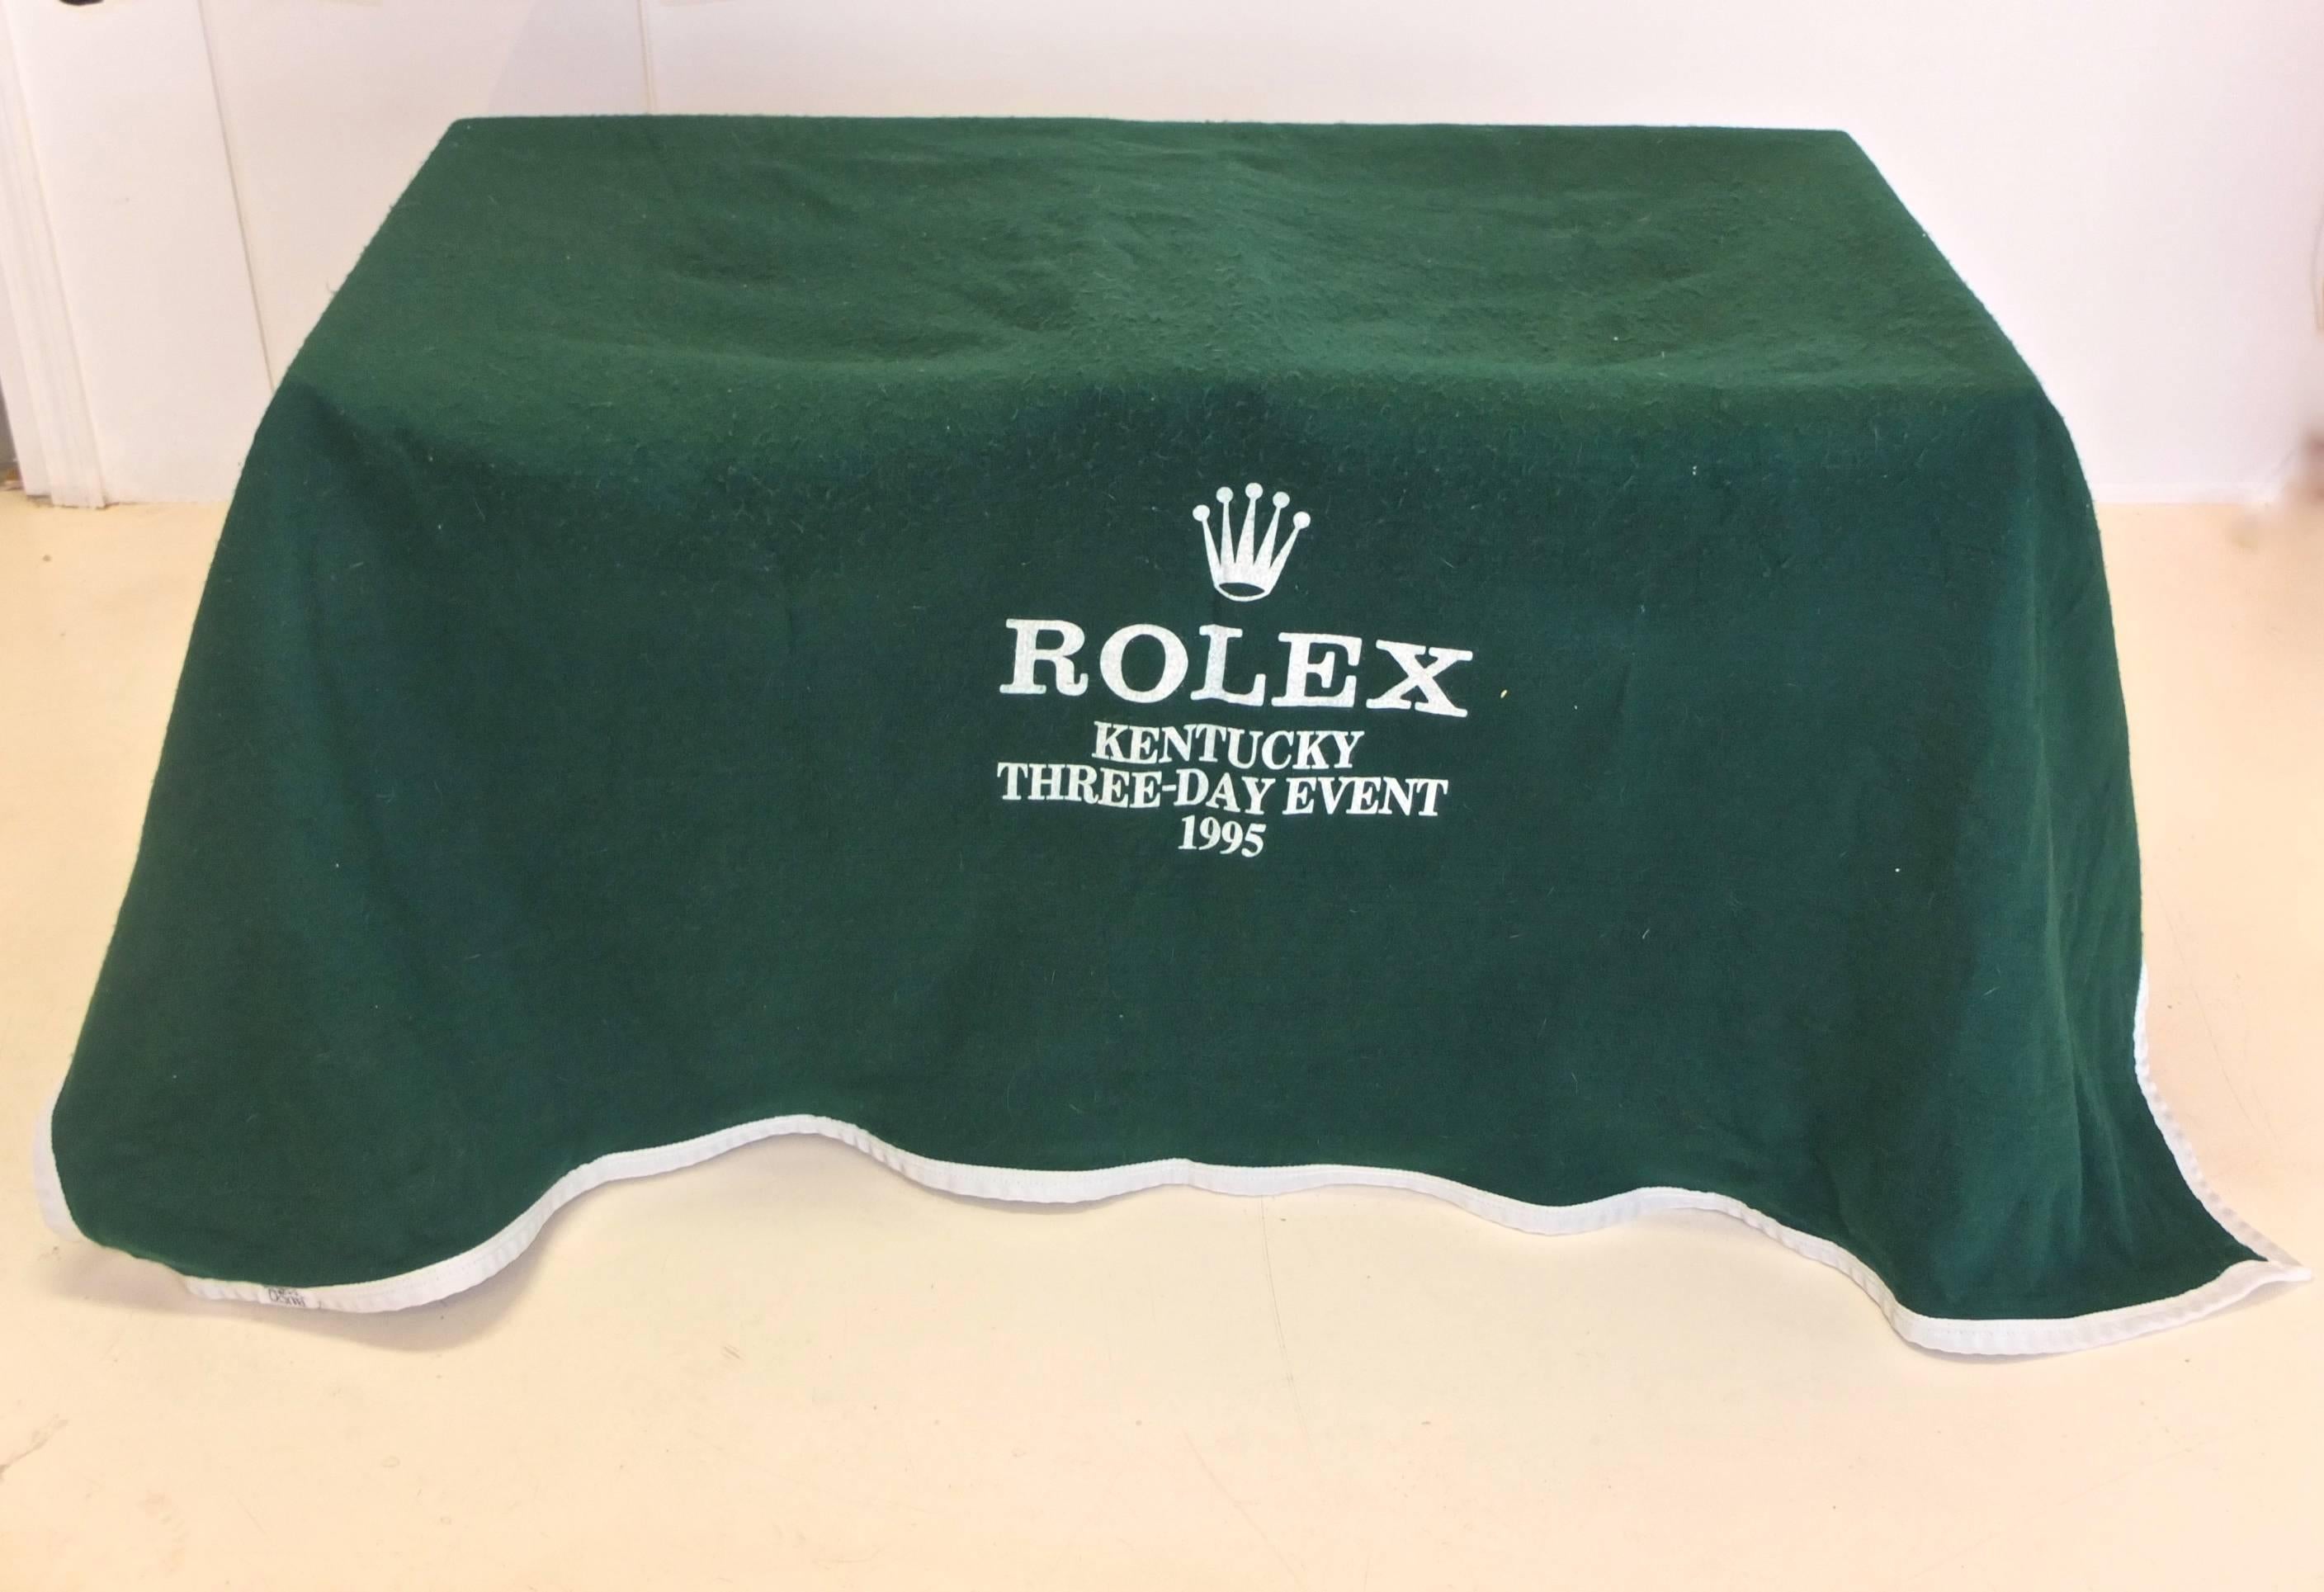 A forrest green felt horse blanket with white nylon trim and straps from the famous Rolex eventing championship. The model is Roma from Miller's Harness Co. Printed on two sides with the Rolex crown and Kentucky Three-Day Event 1995. 

It is huge